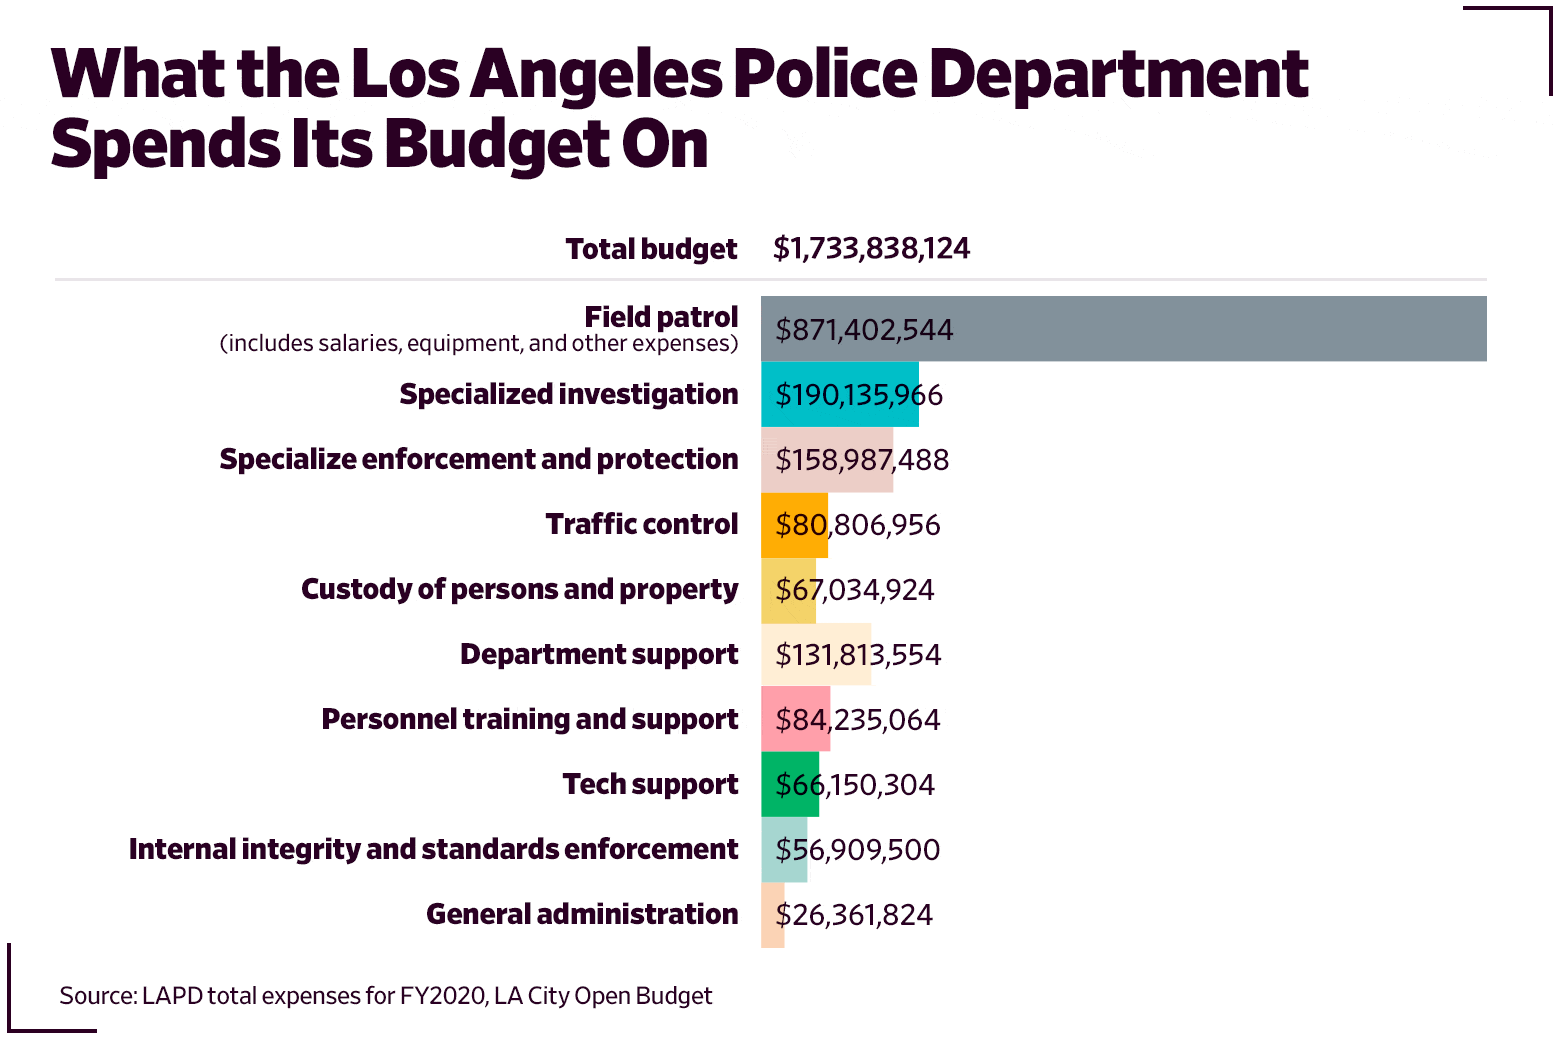 What the Los Angeles Police spends its budget on.